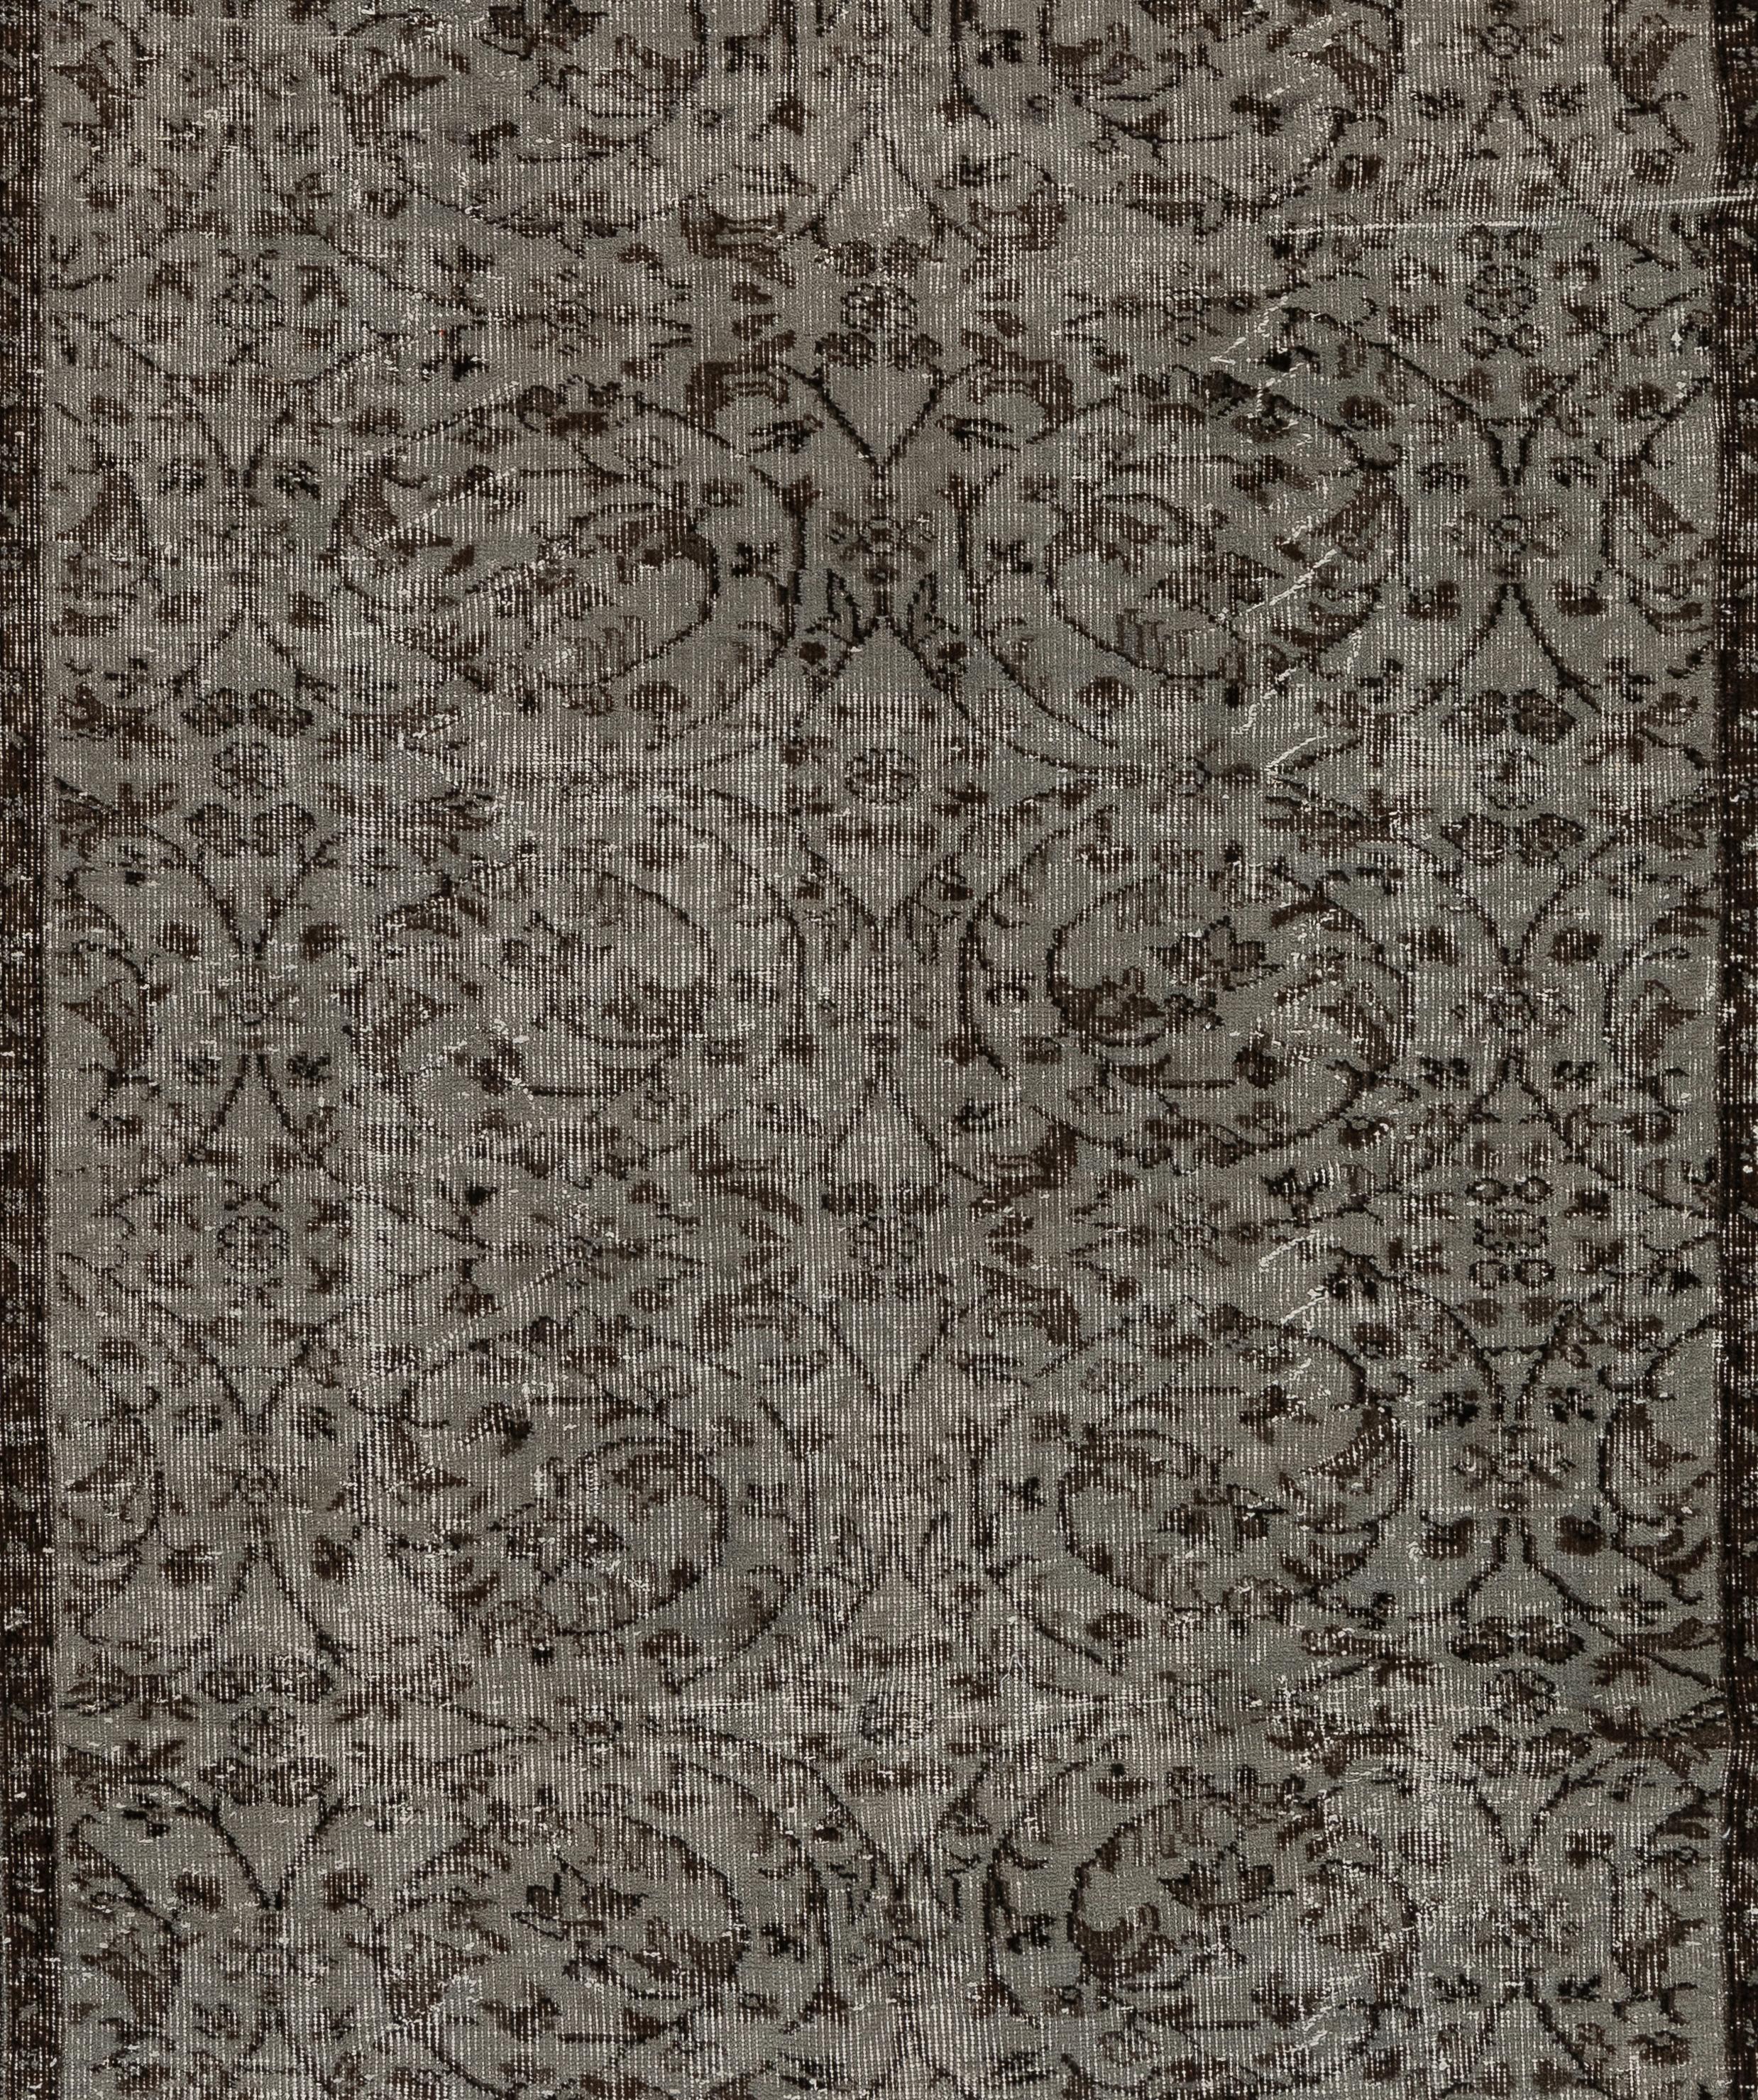 Turkish 5.9x9.5 Ft Vintage Floral Motif Handmade Area Rug in Gray. Anatolian Wool Carpet For Sale